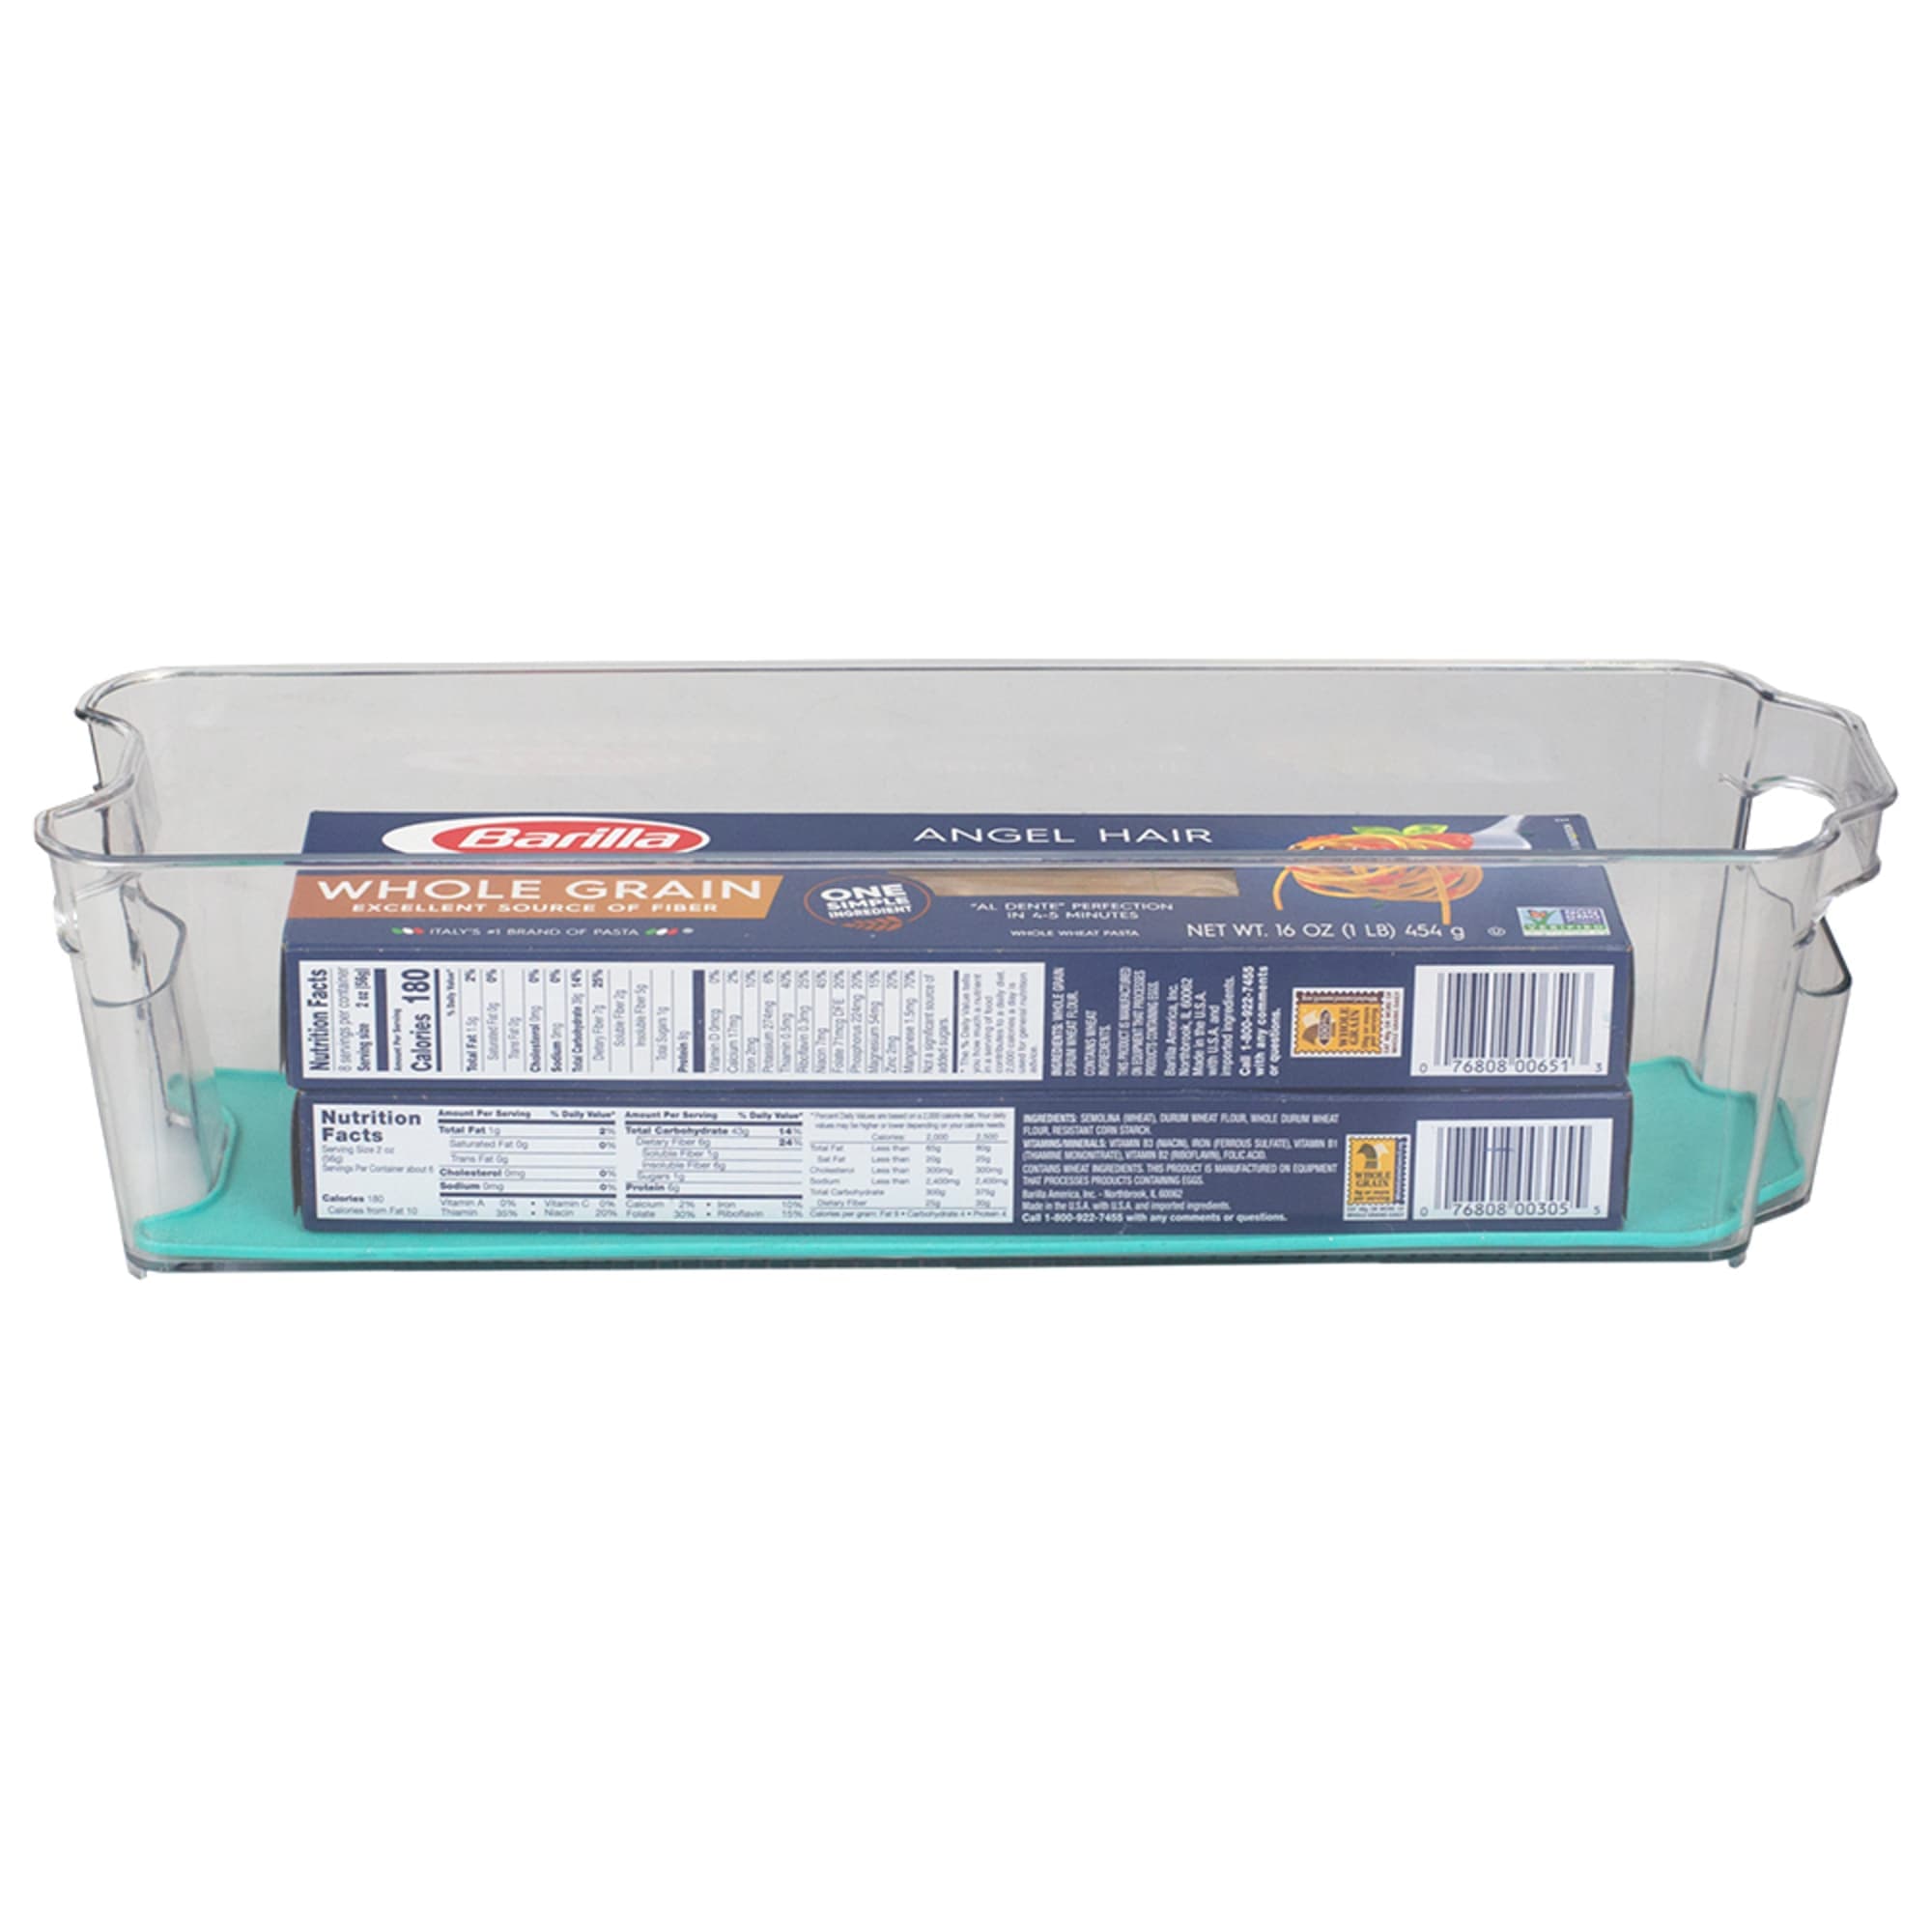 Home Basics 4" x 15"  Multi-Purpose Plastic Fridge Bin with Rubber Lining, Turquoise $3 EACH, CASE PACK OF 12